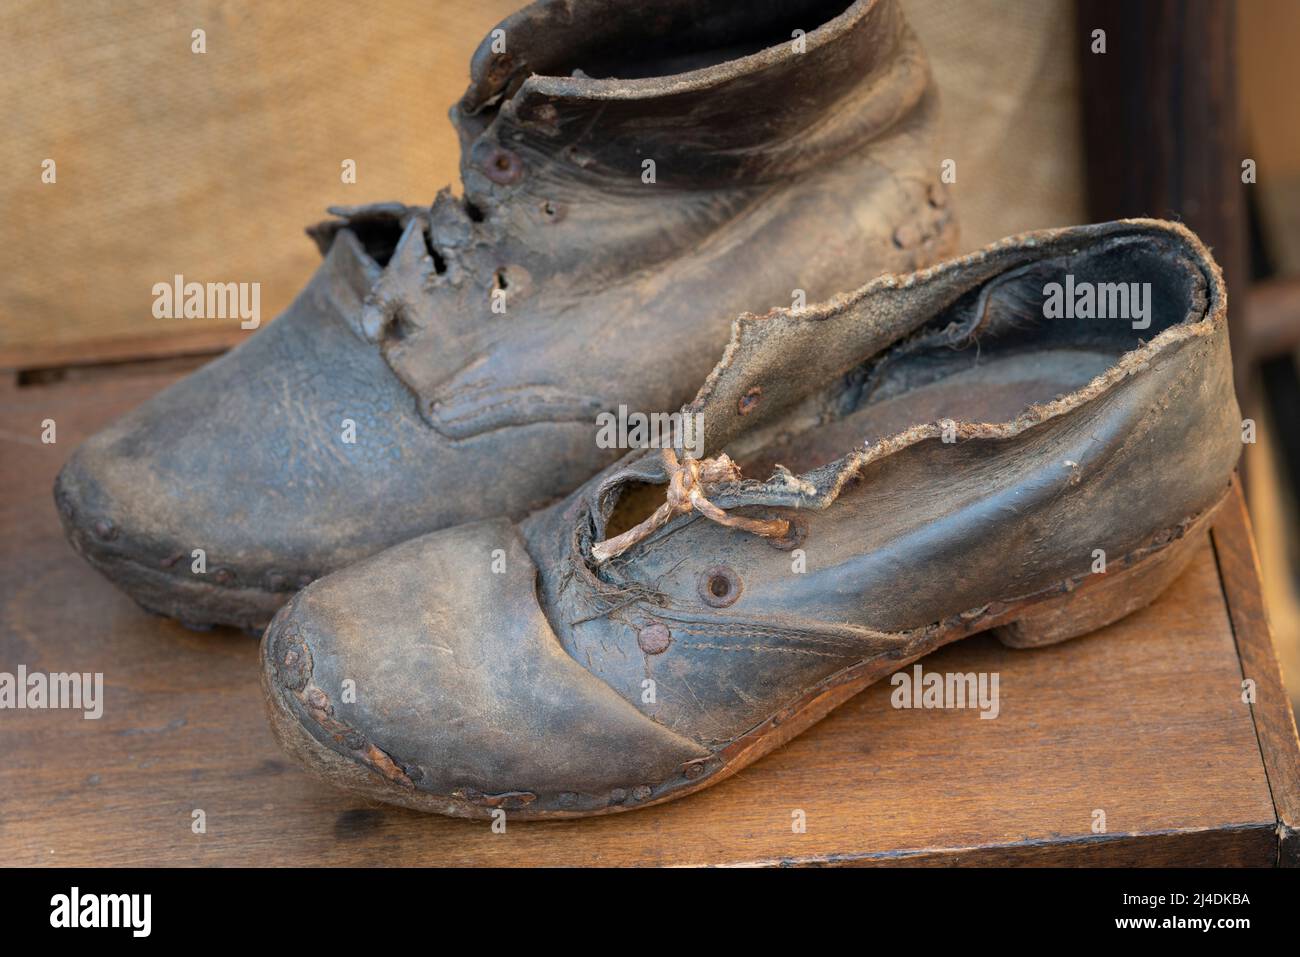 Italy, Lombardy, Flea Market, Old Broken Leather Shoes Stock Photo